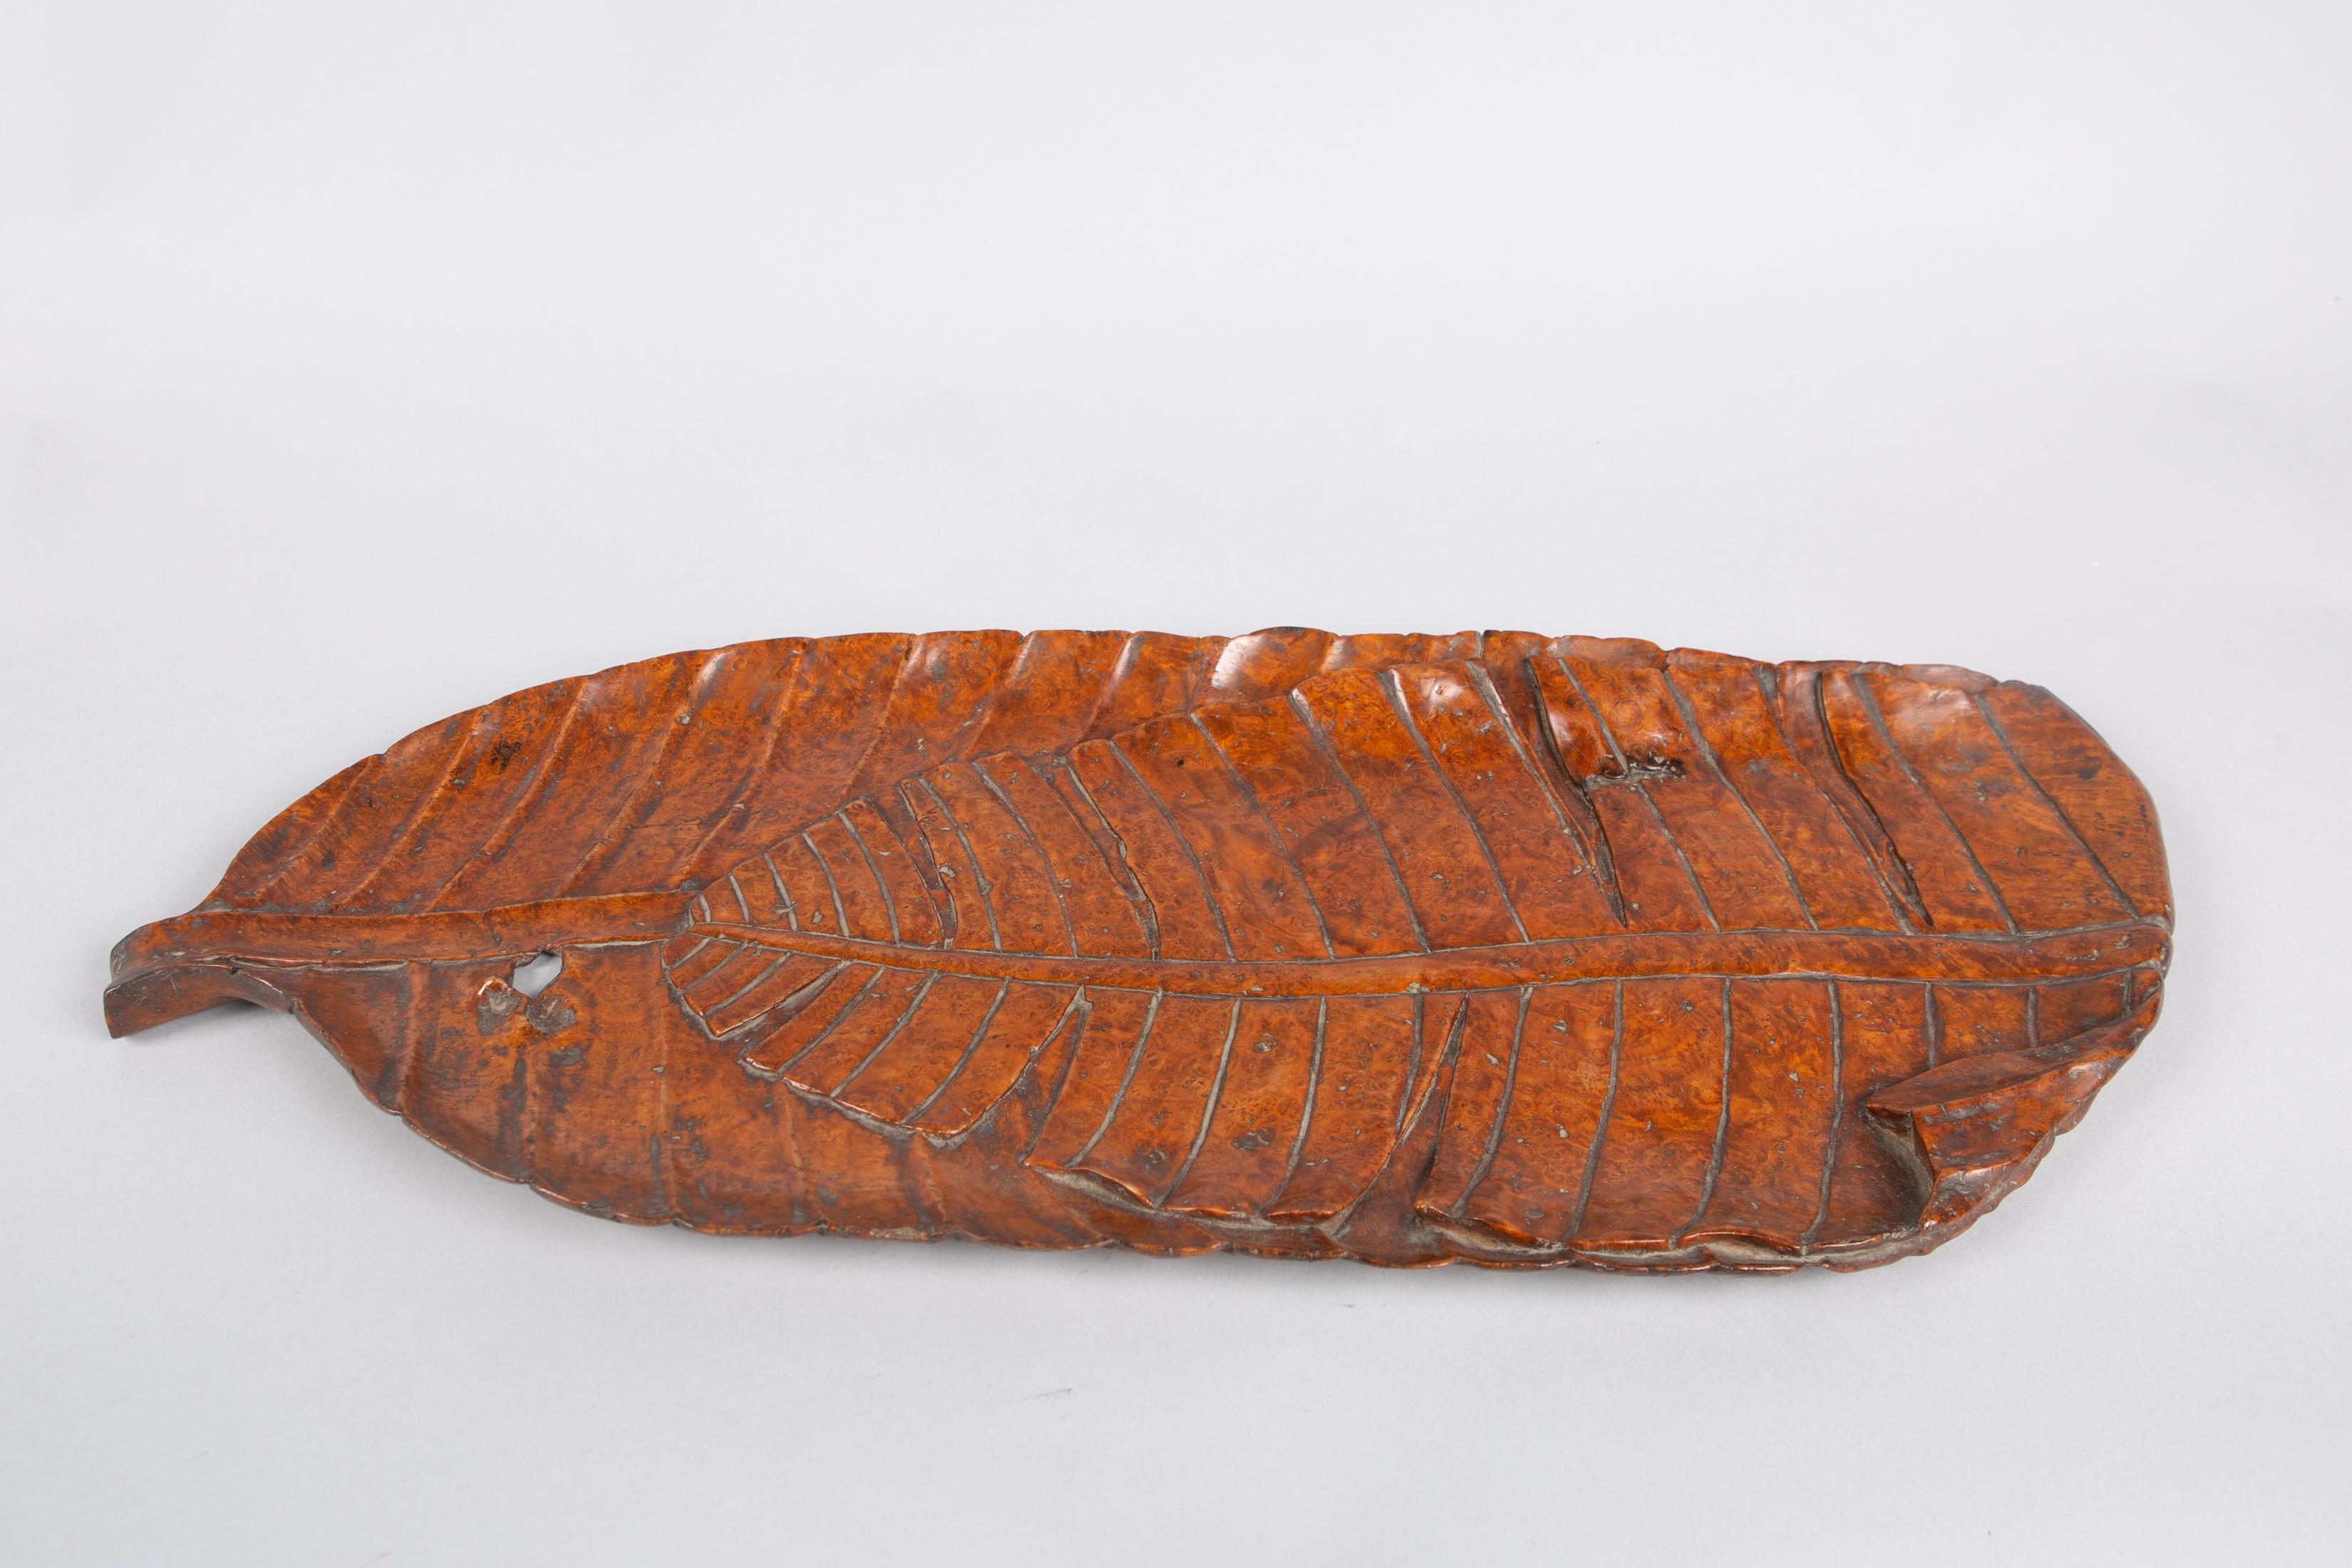 Meiji period (1868-1912) beautifully carved tray in the shape of a folded banana leaf, so the viewer can appreciate both sides of the leaf from a single vantage point. (Banana leaves were often folded to make a stronger serving plate.) Delicate and